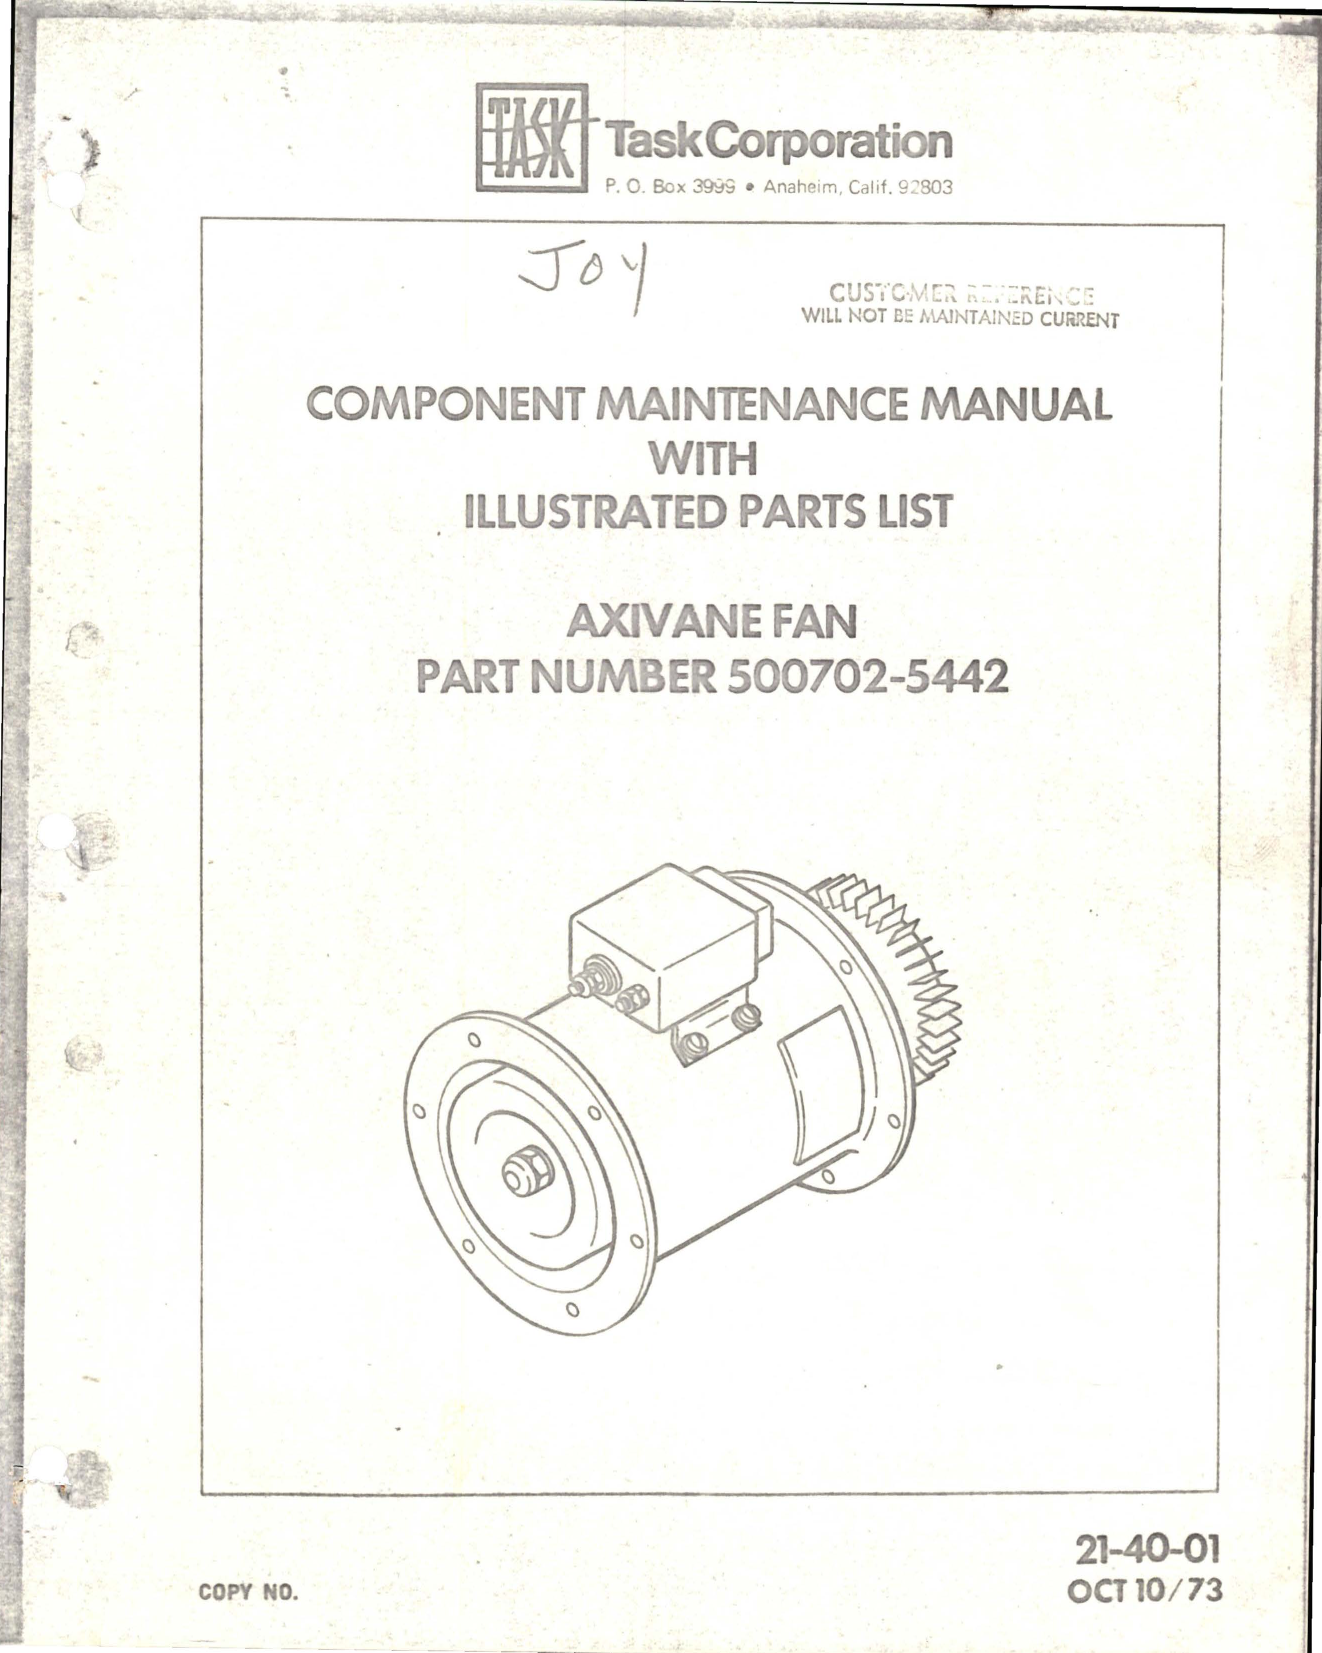 Sample page 1 from AirCorps Library document: Maintenance Manual with Illustrated Parts List for Axivane Fan - Part 500702-5442 